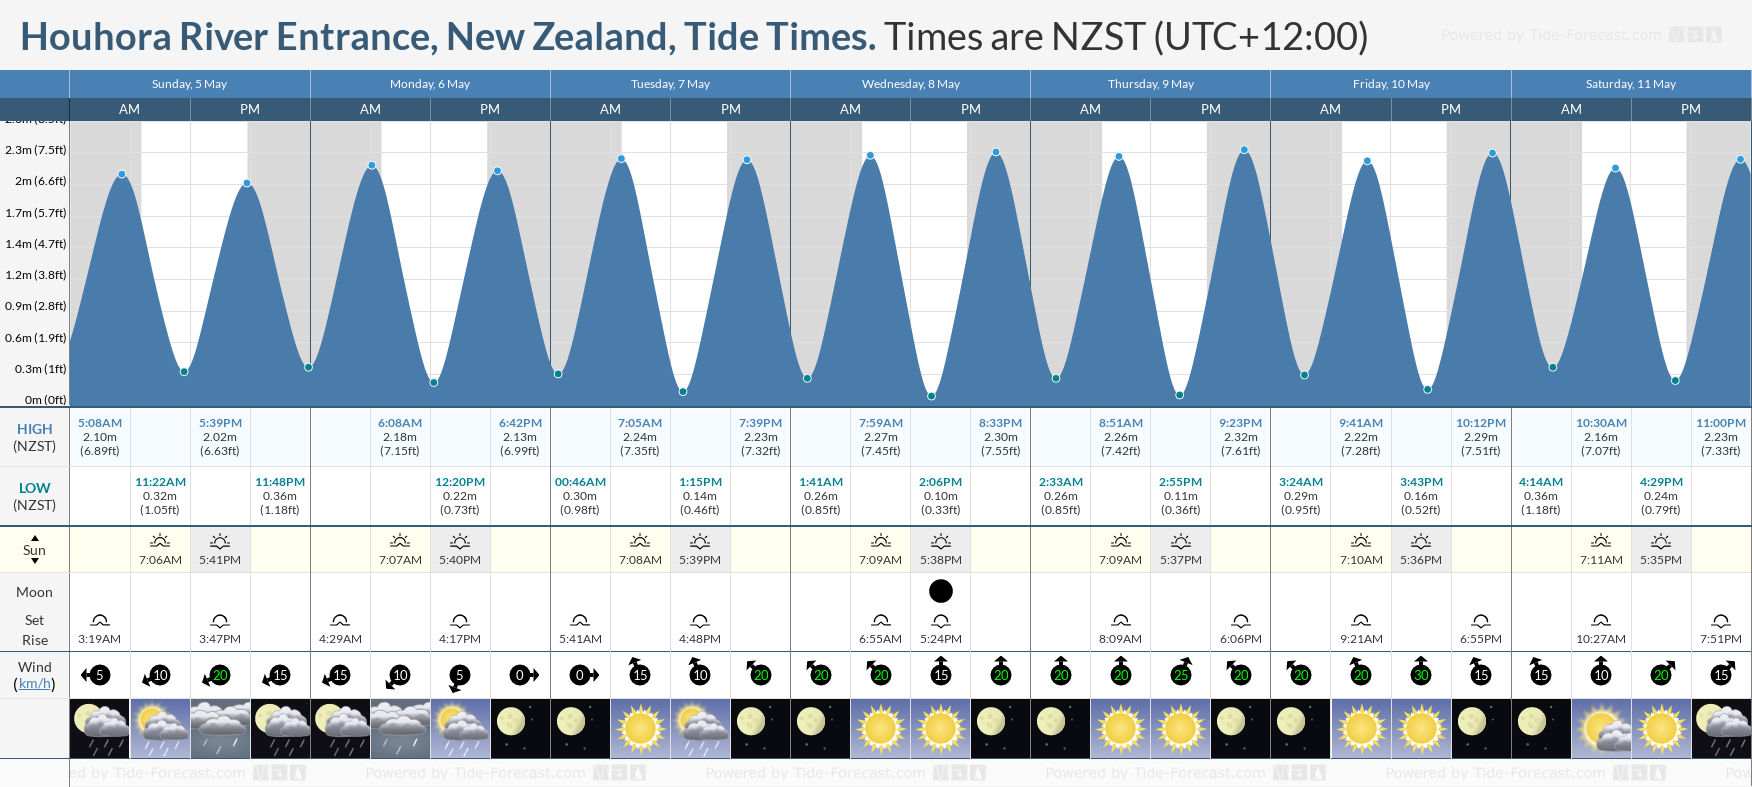 Houhora River Entrance, New Zealand Tide Chart including high and low tide tide times for the next 7 days